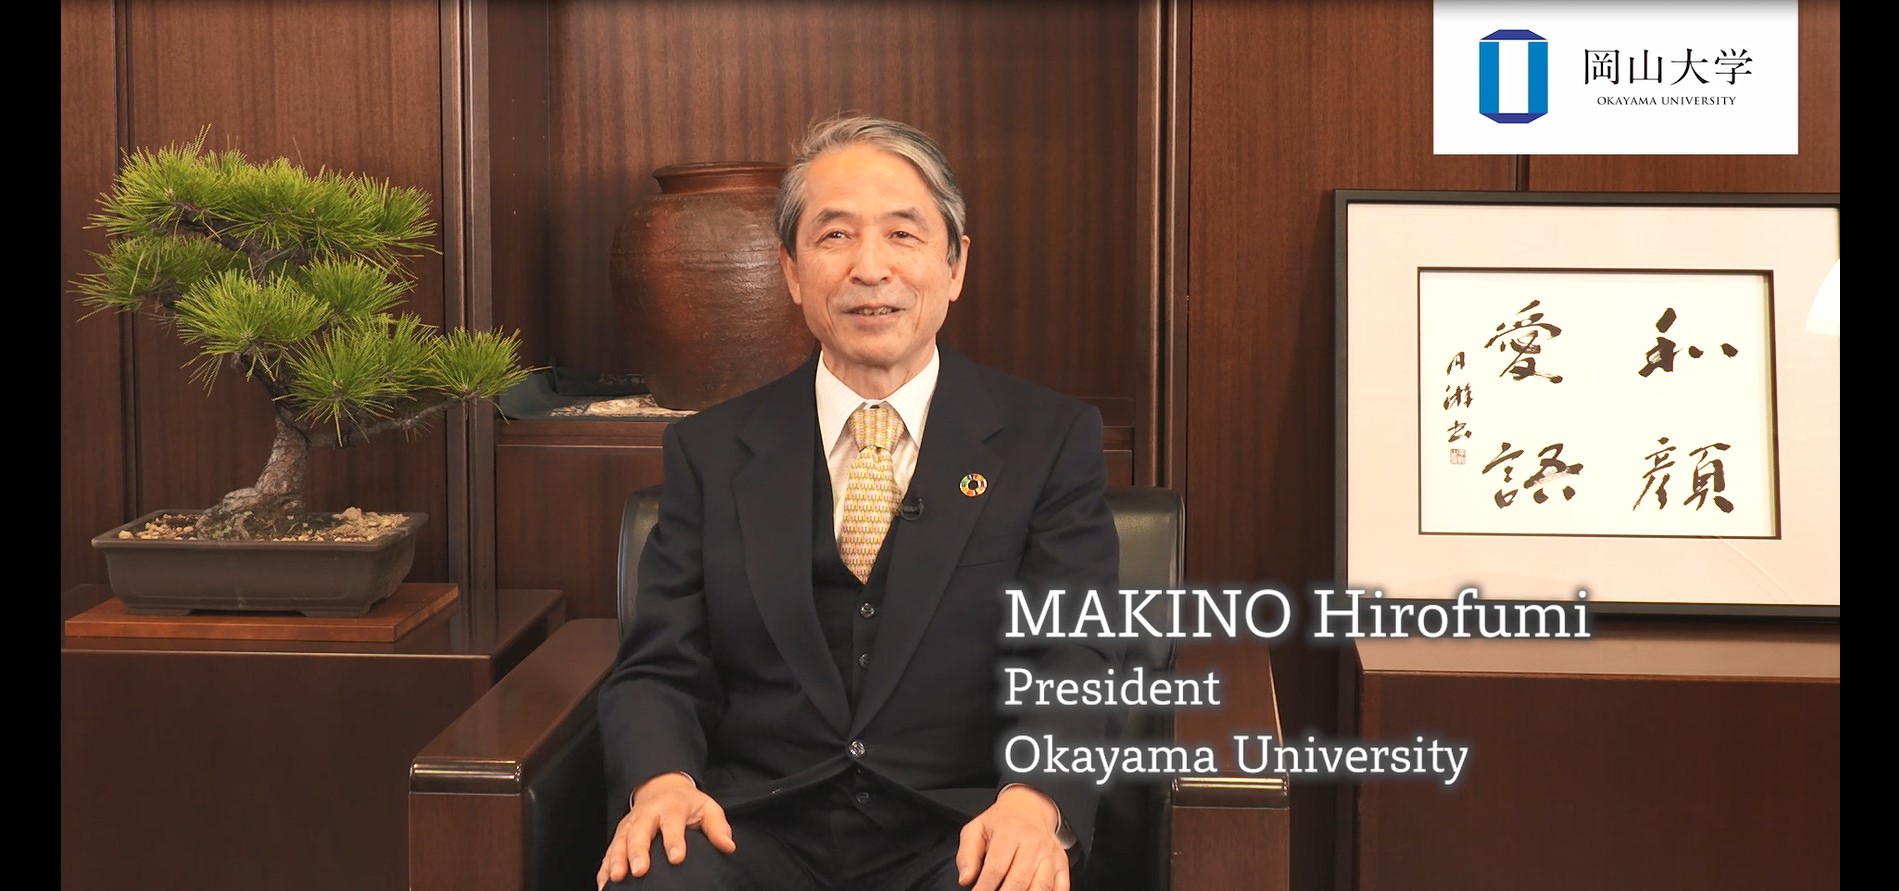 Video message by President Makino at the opening ceremony